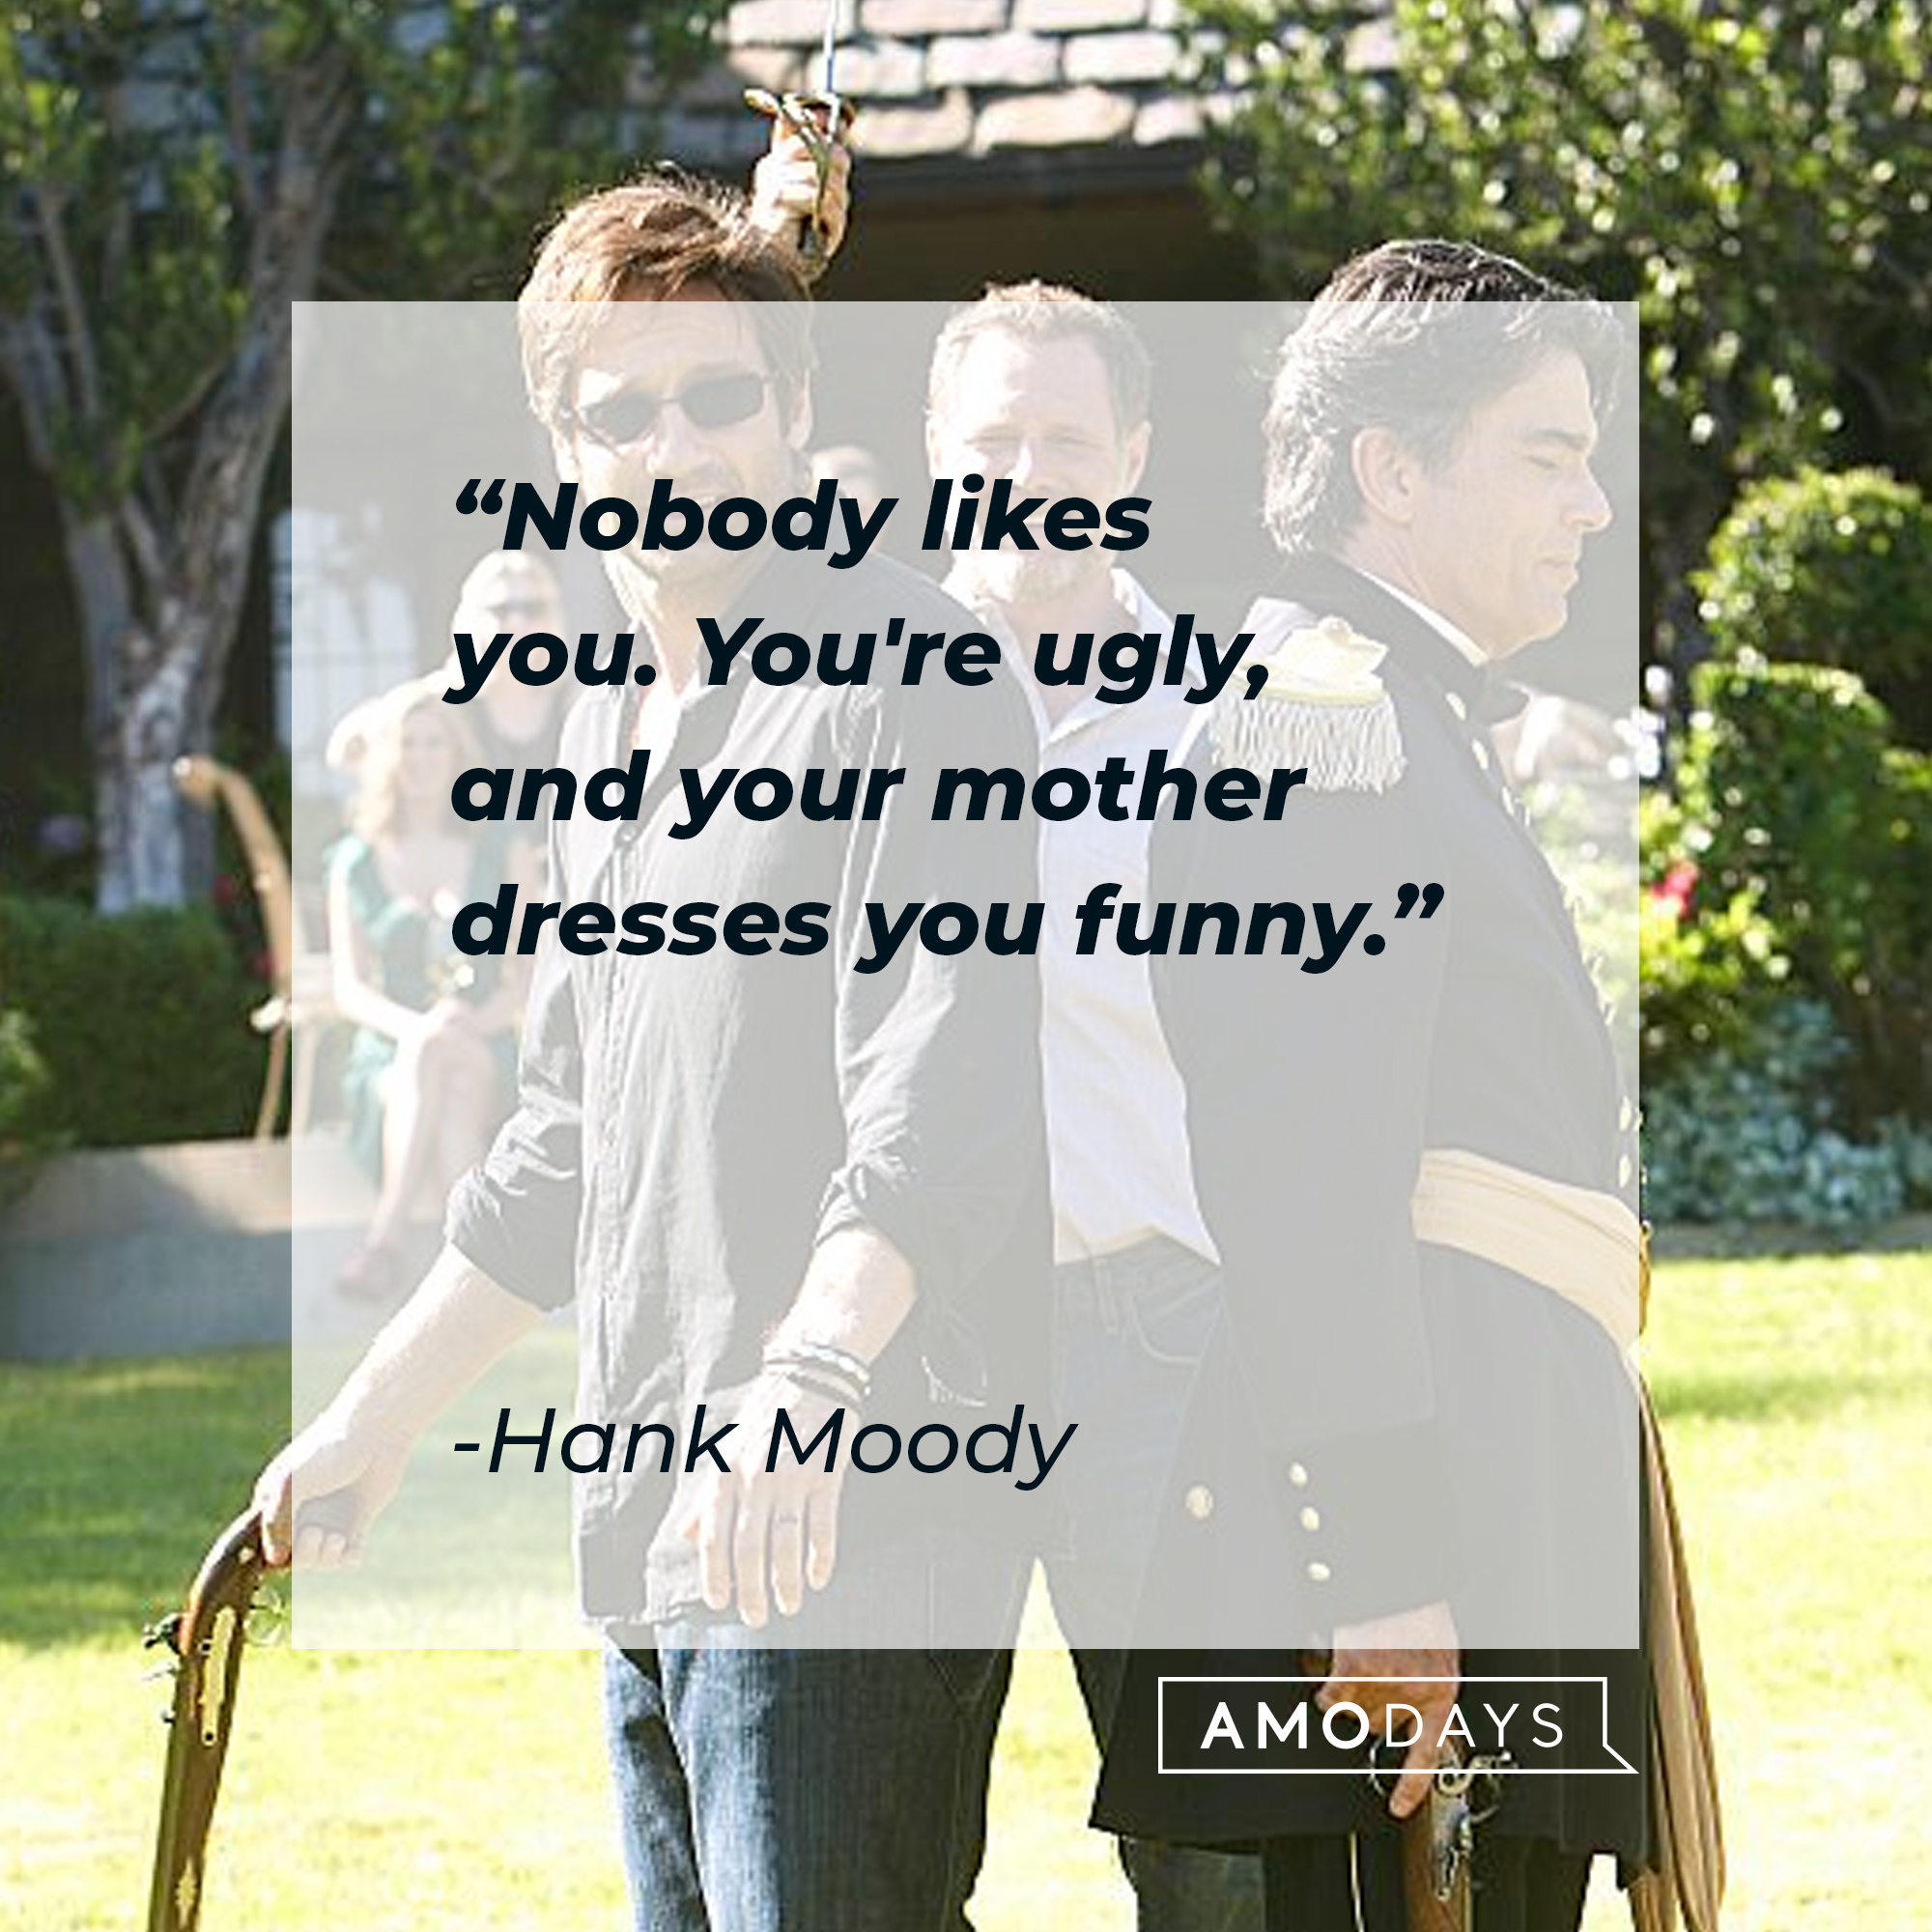 Hank Moody's quote: "Nobody likes you. You're ugly, and your mother dresses you funny." | Image: AmoDays